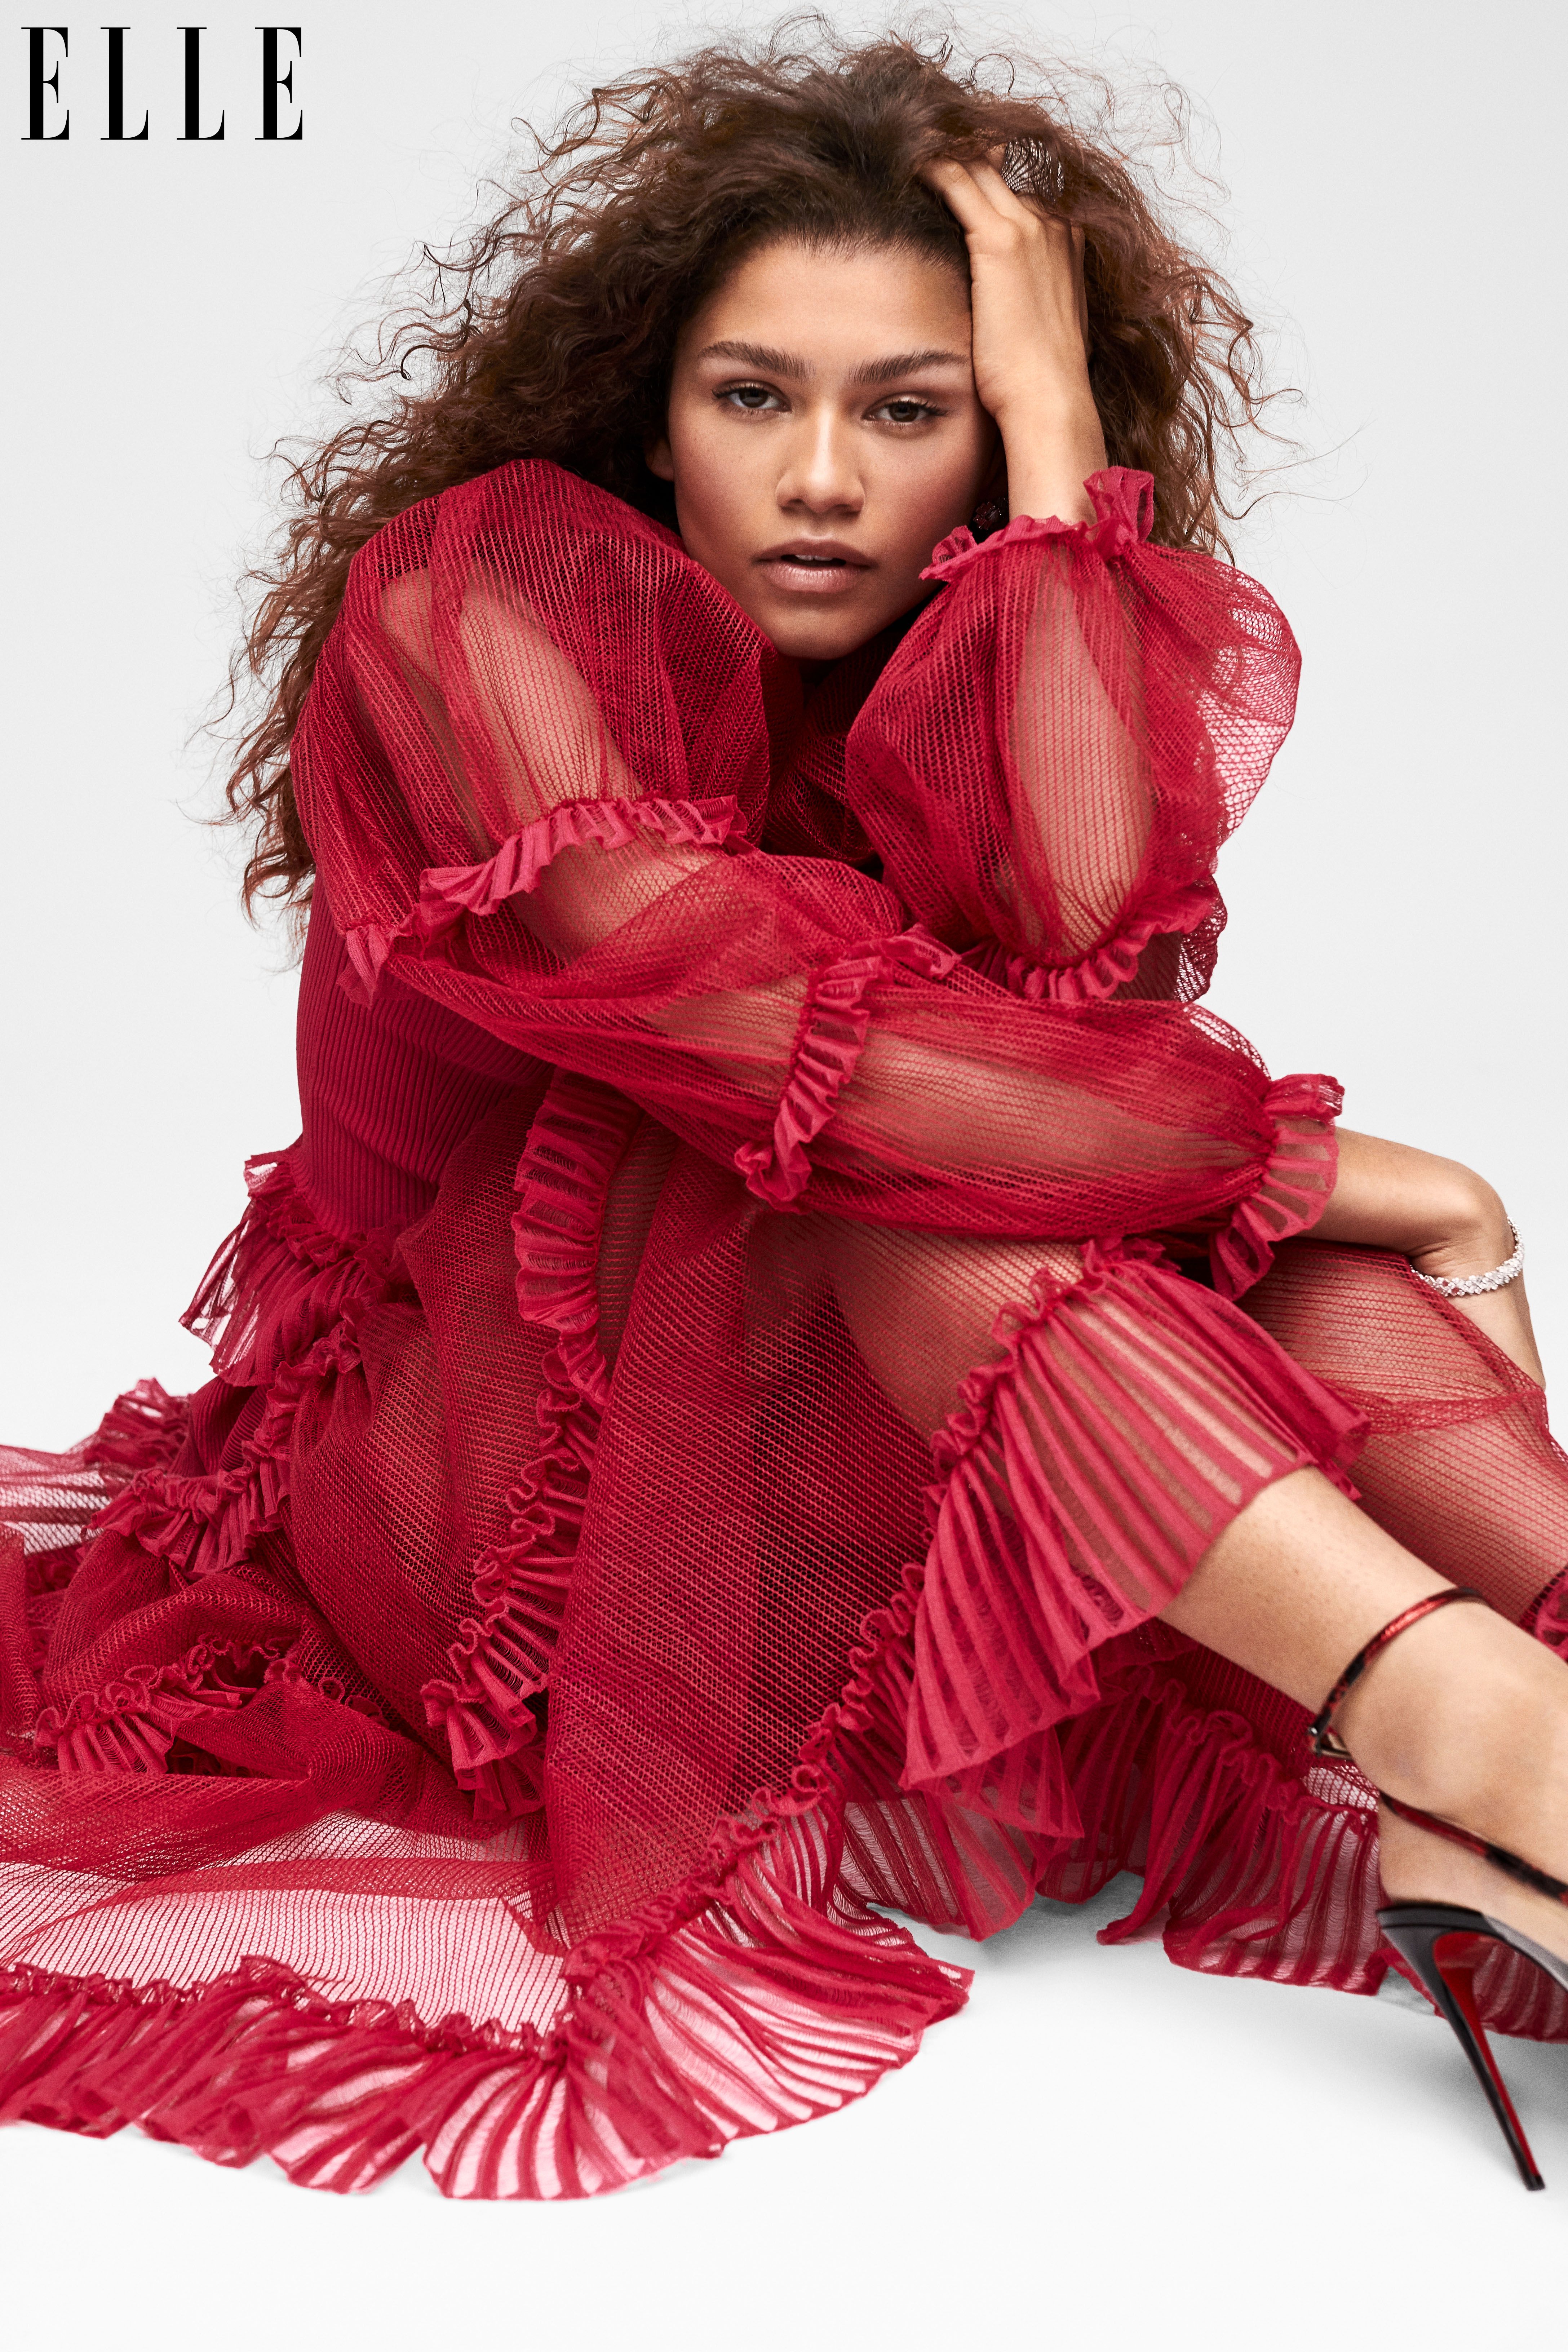 How do we feel abour Zendaya on the cover of Elle Magazine but is